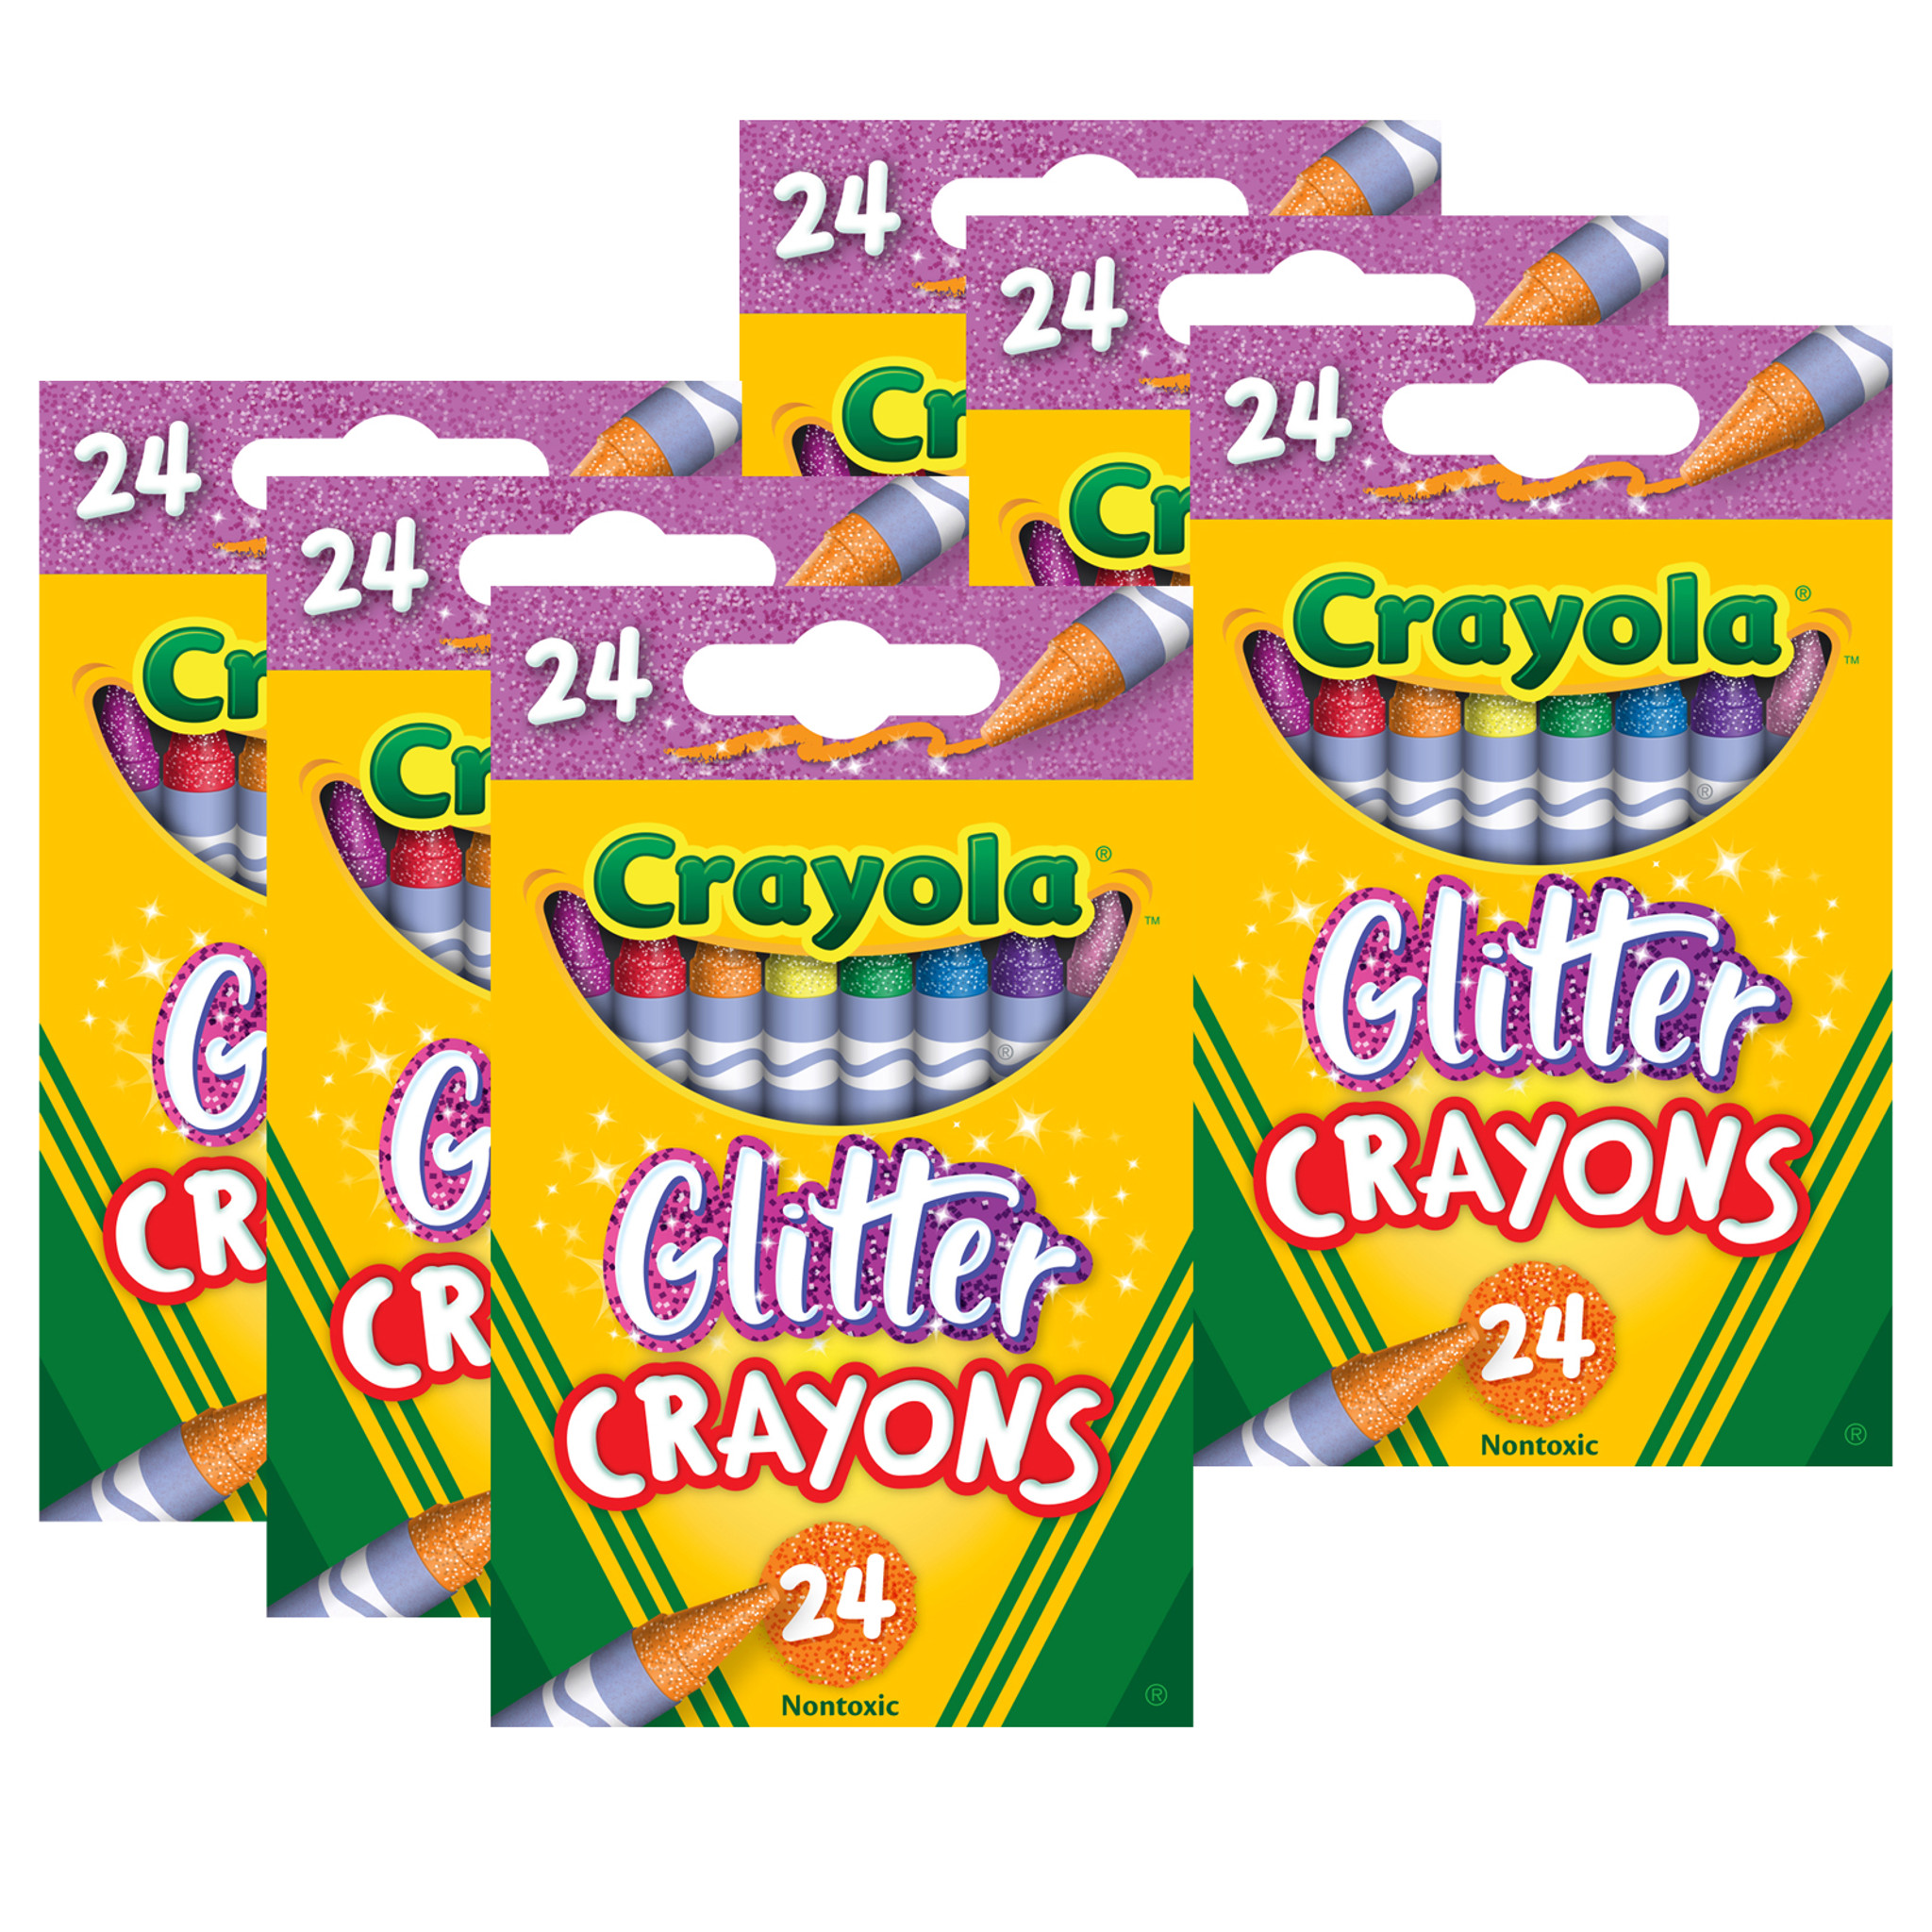 2 Pack Crayola Glitter Markers 6 Count